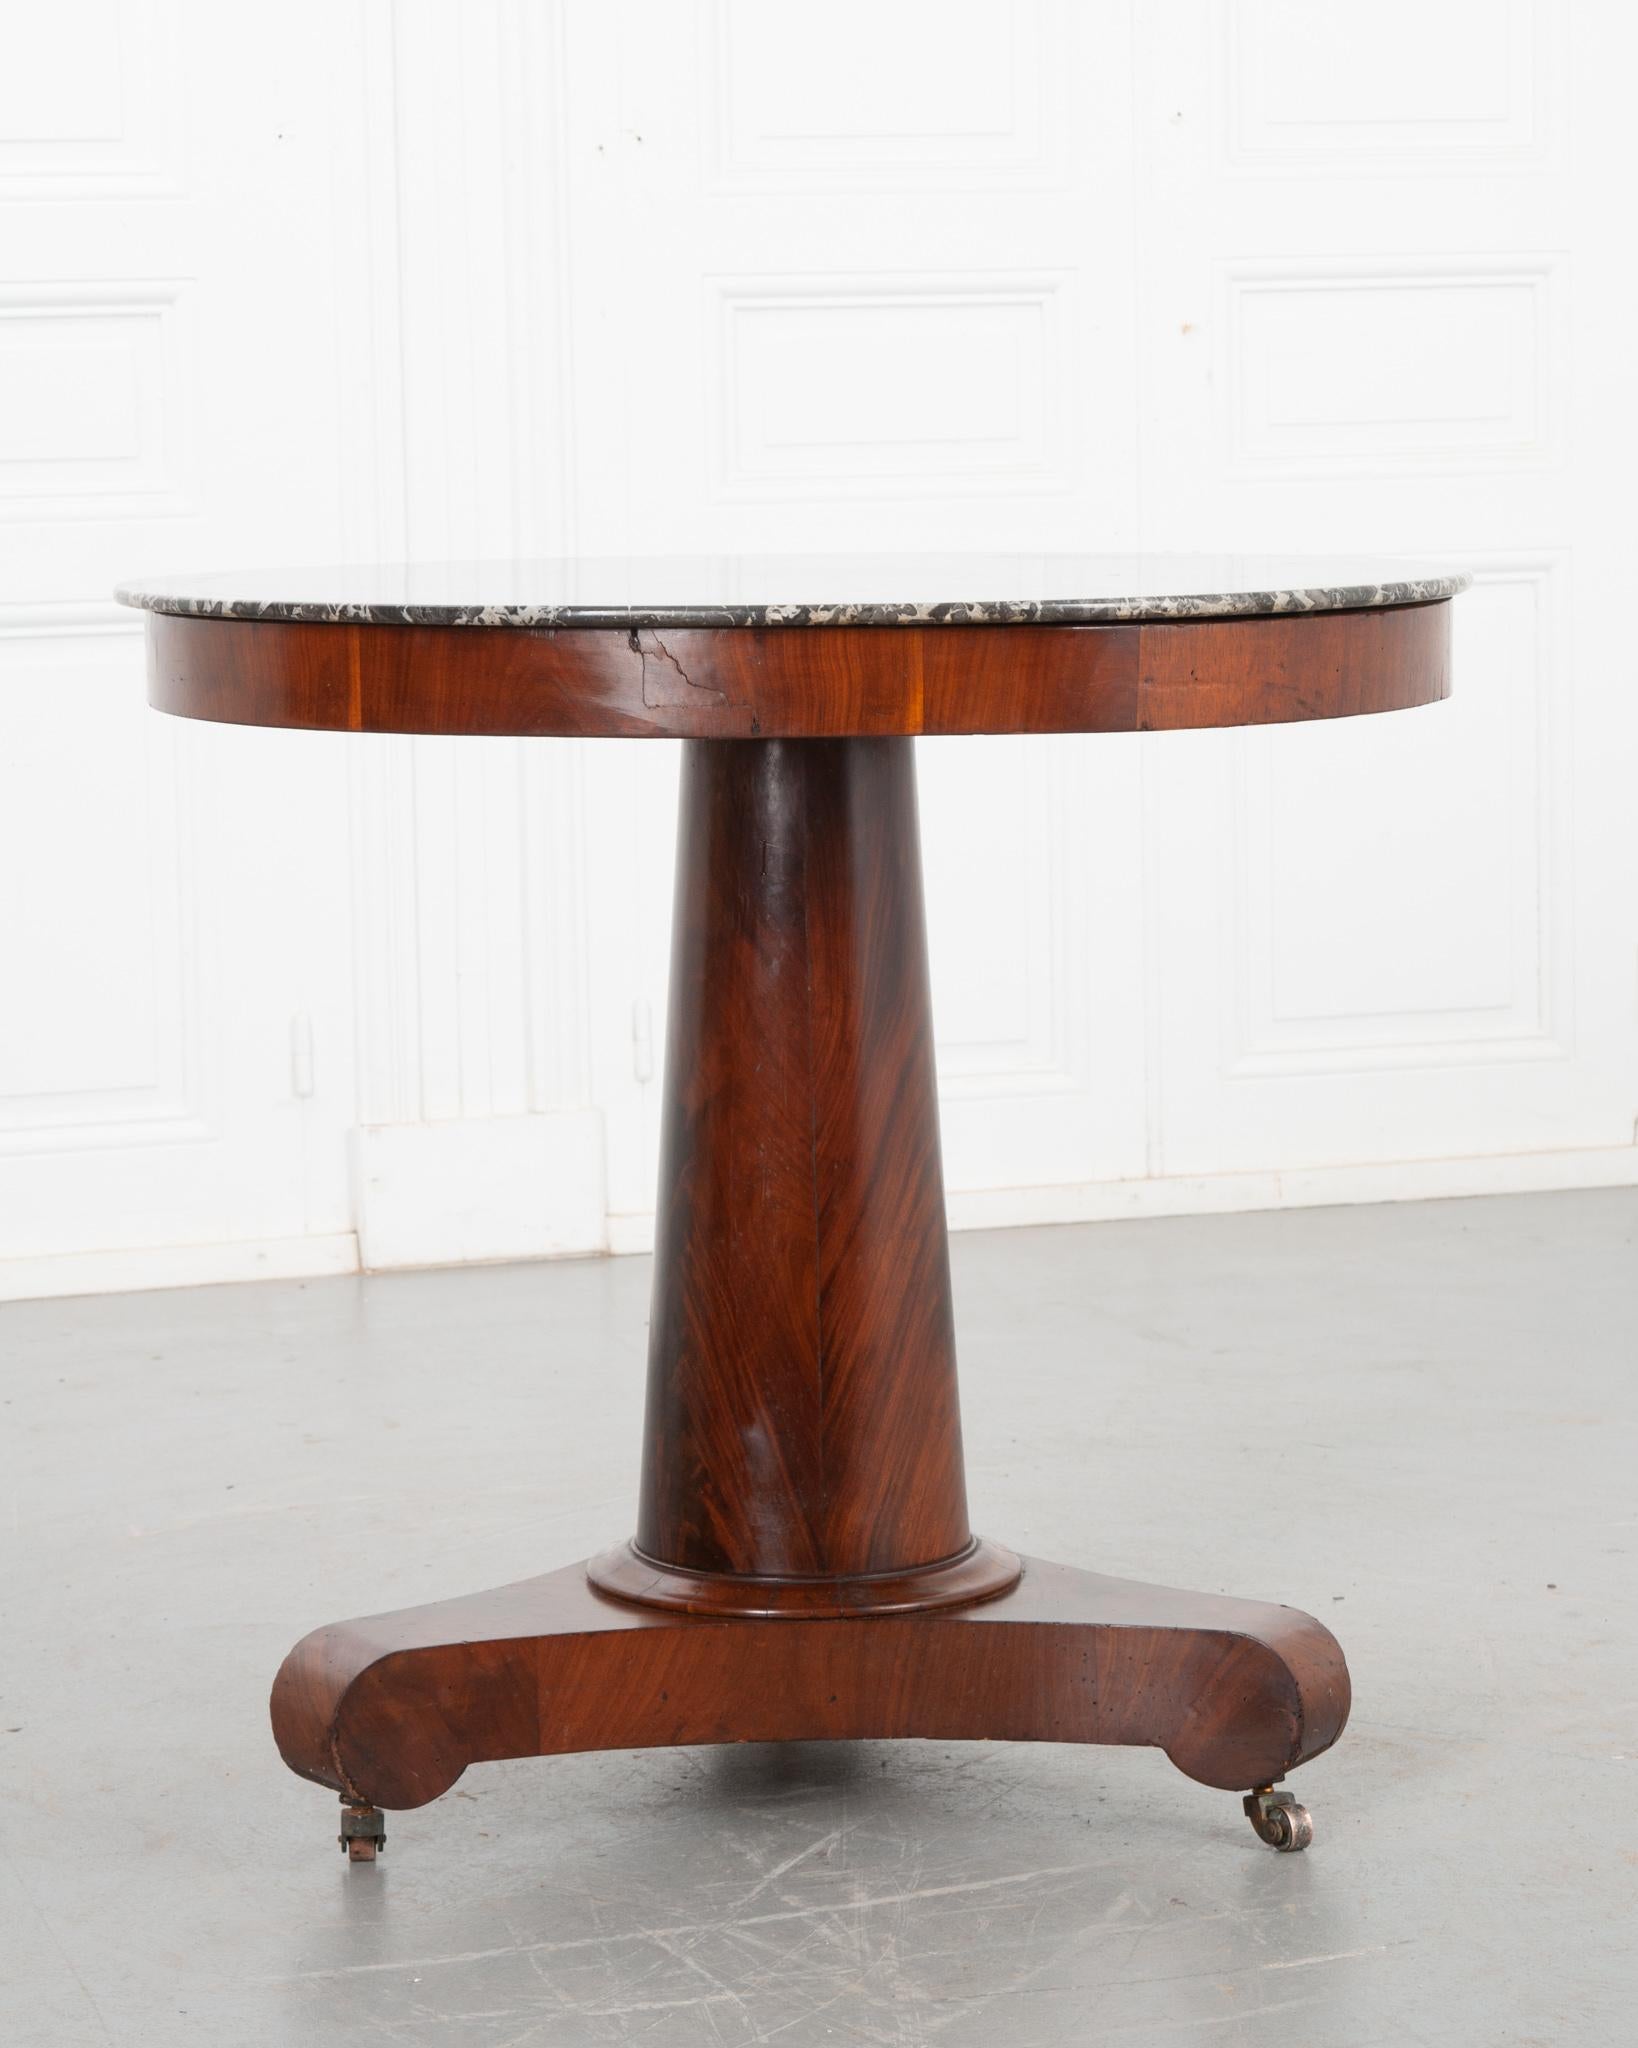 Patinated French 19th Century Empire Style Center Table